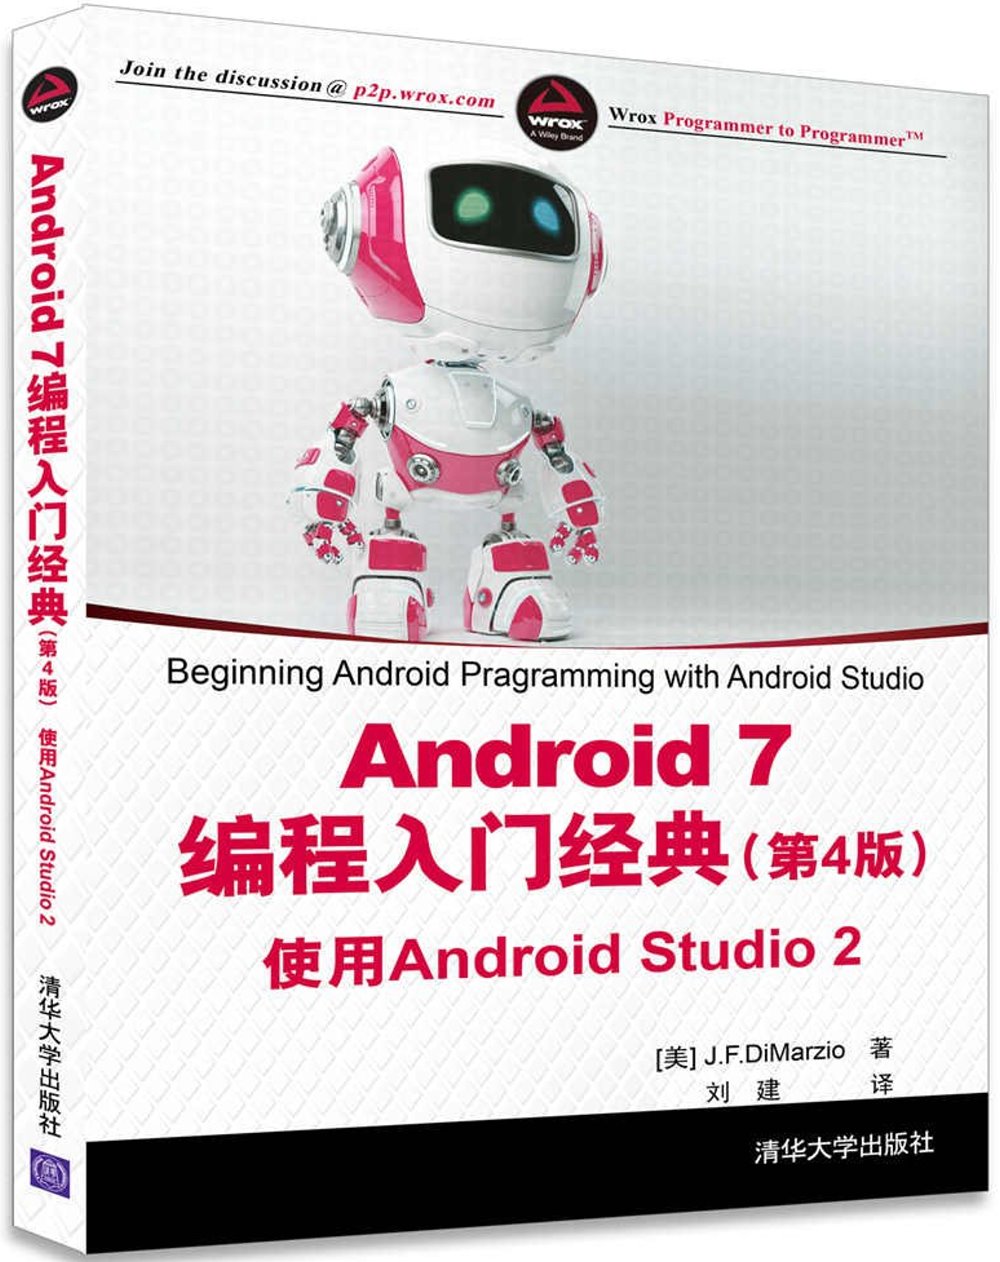 Android 7編程入門經典：使用Android Studio 2（第4版）